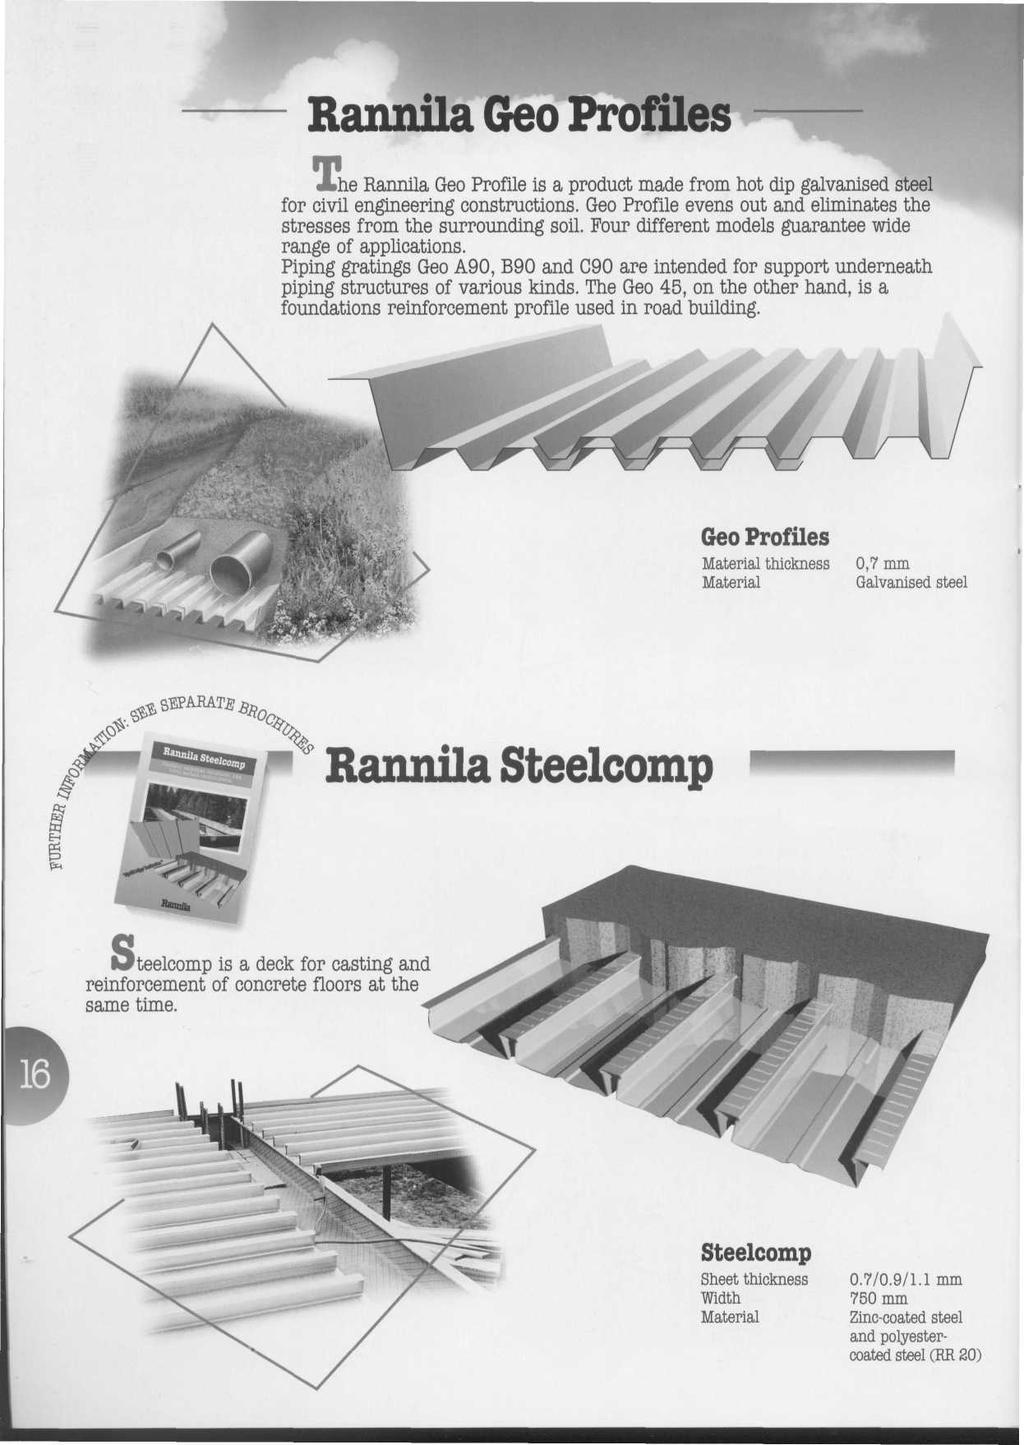 Rannila Geo Profiles he Rannila Geo Profile is a product made from hot dip galvanised steel for civil engineering constructions.